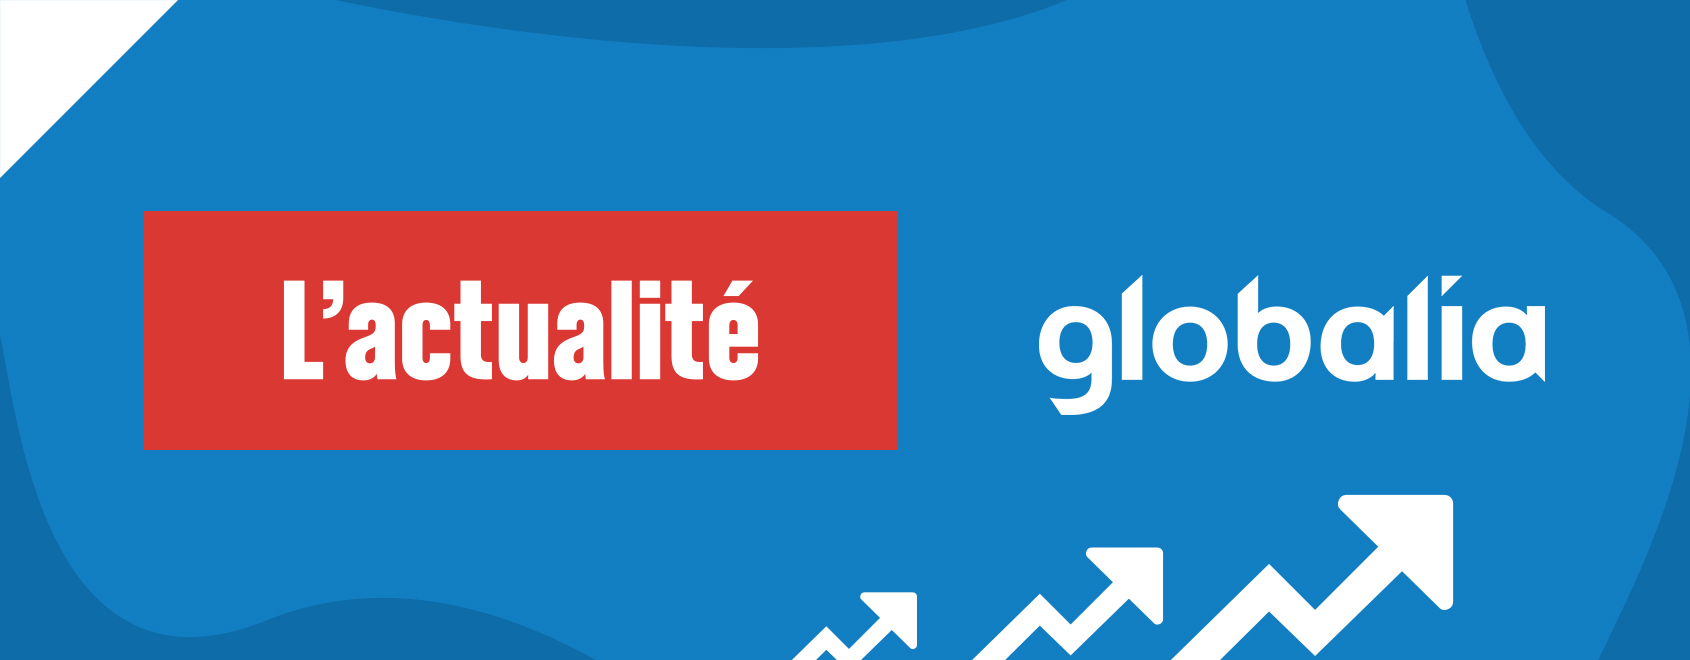 Globalia, 2018 Growth Leader According to L’Actualité!